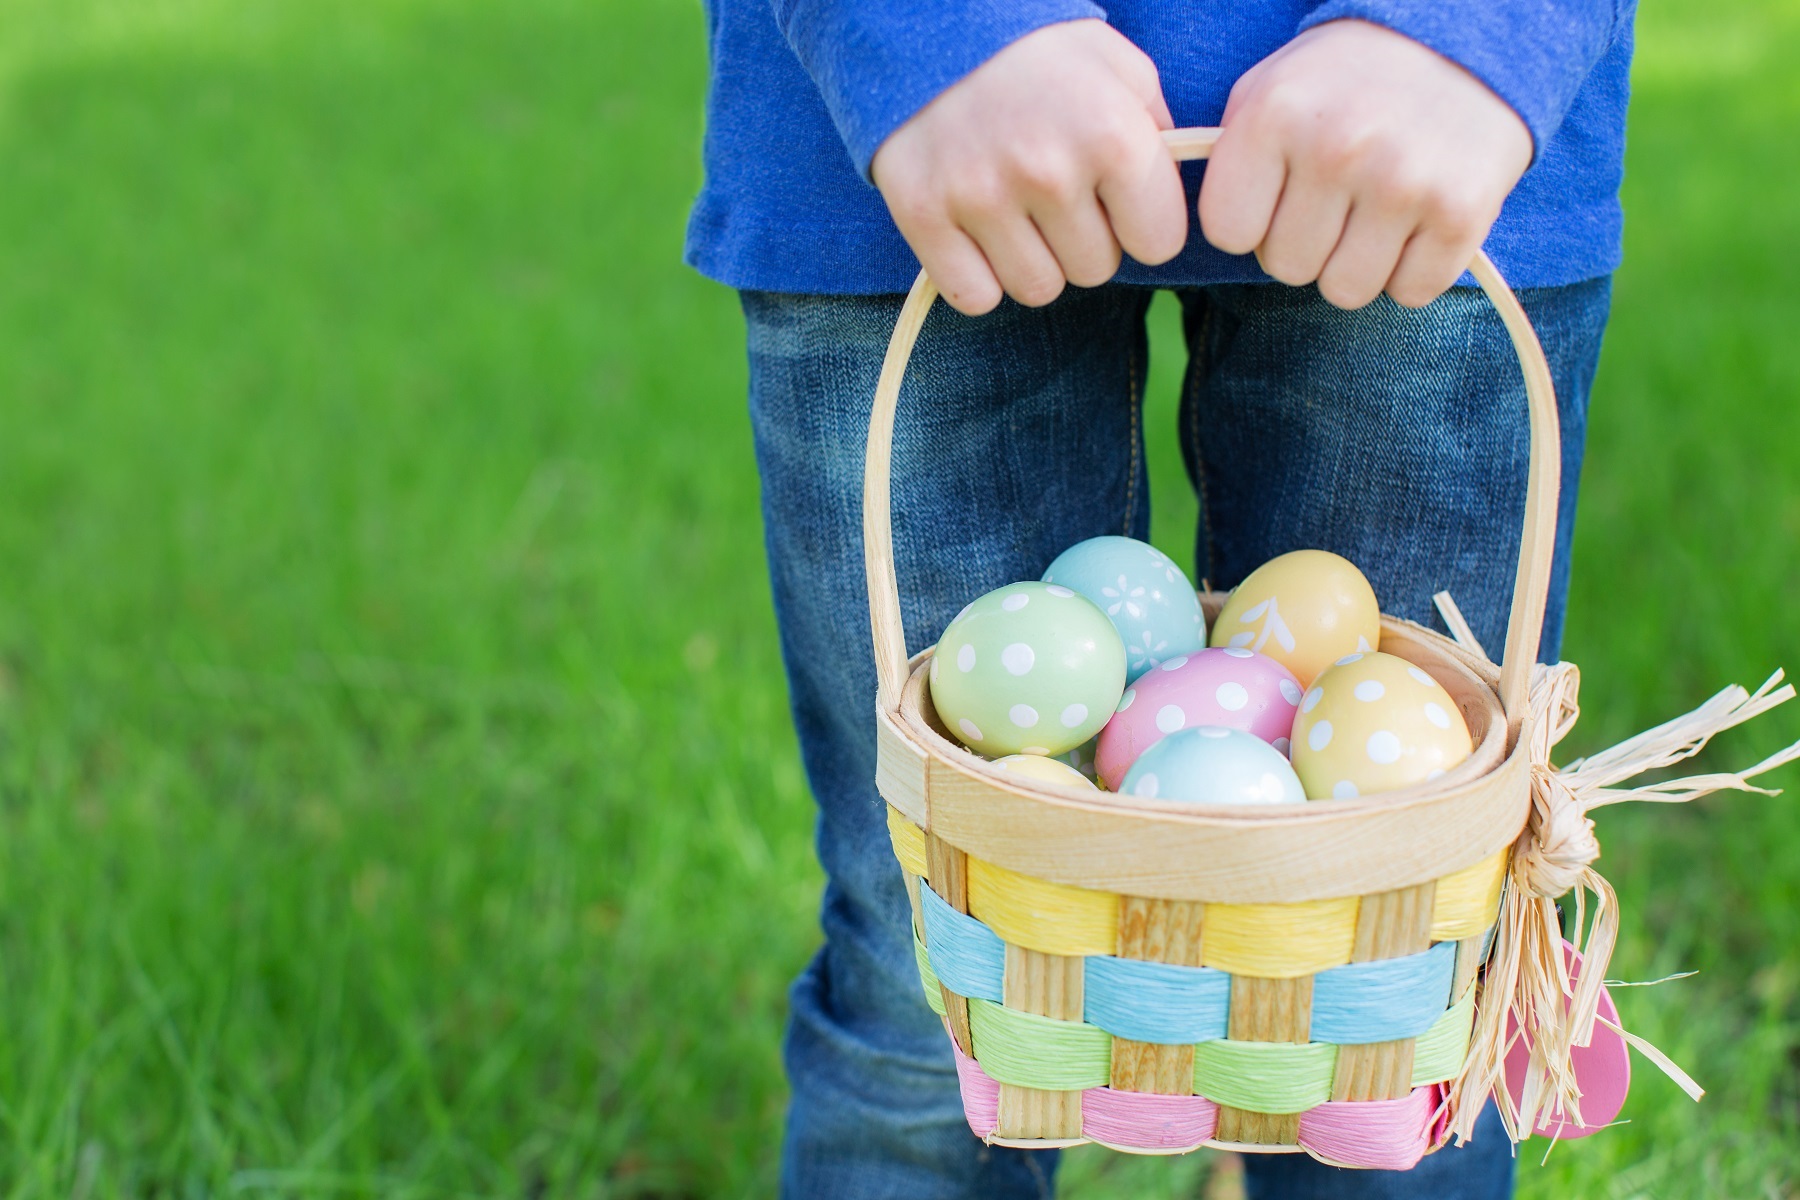 The 12 Best Easter Egg Hunts For All Ages